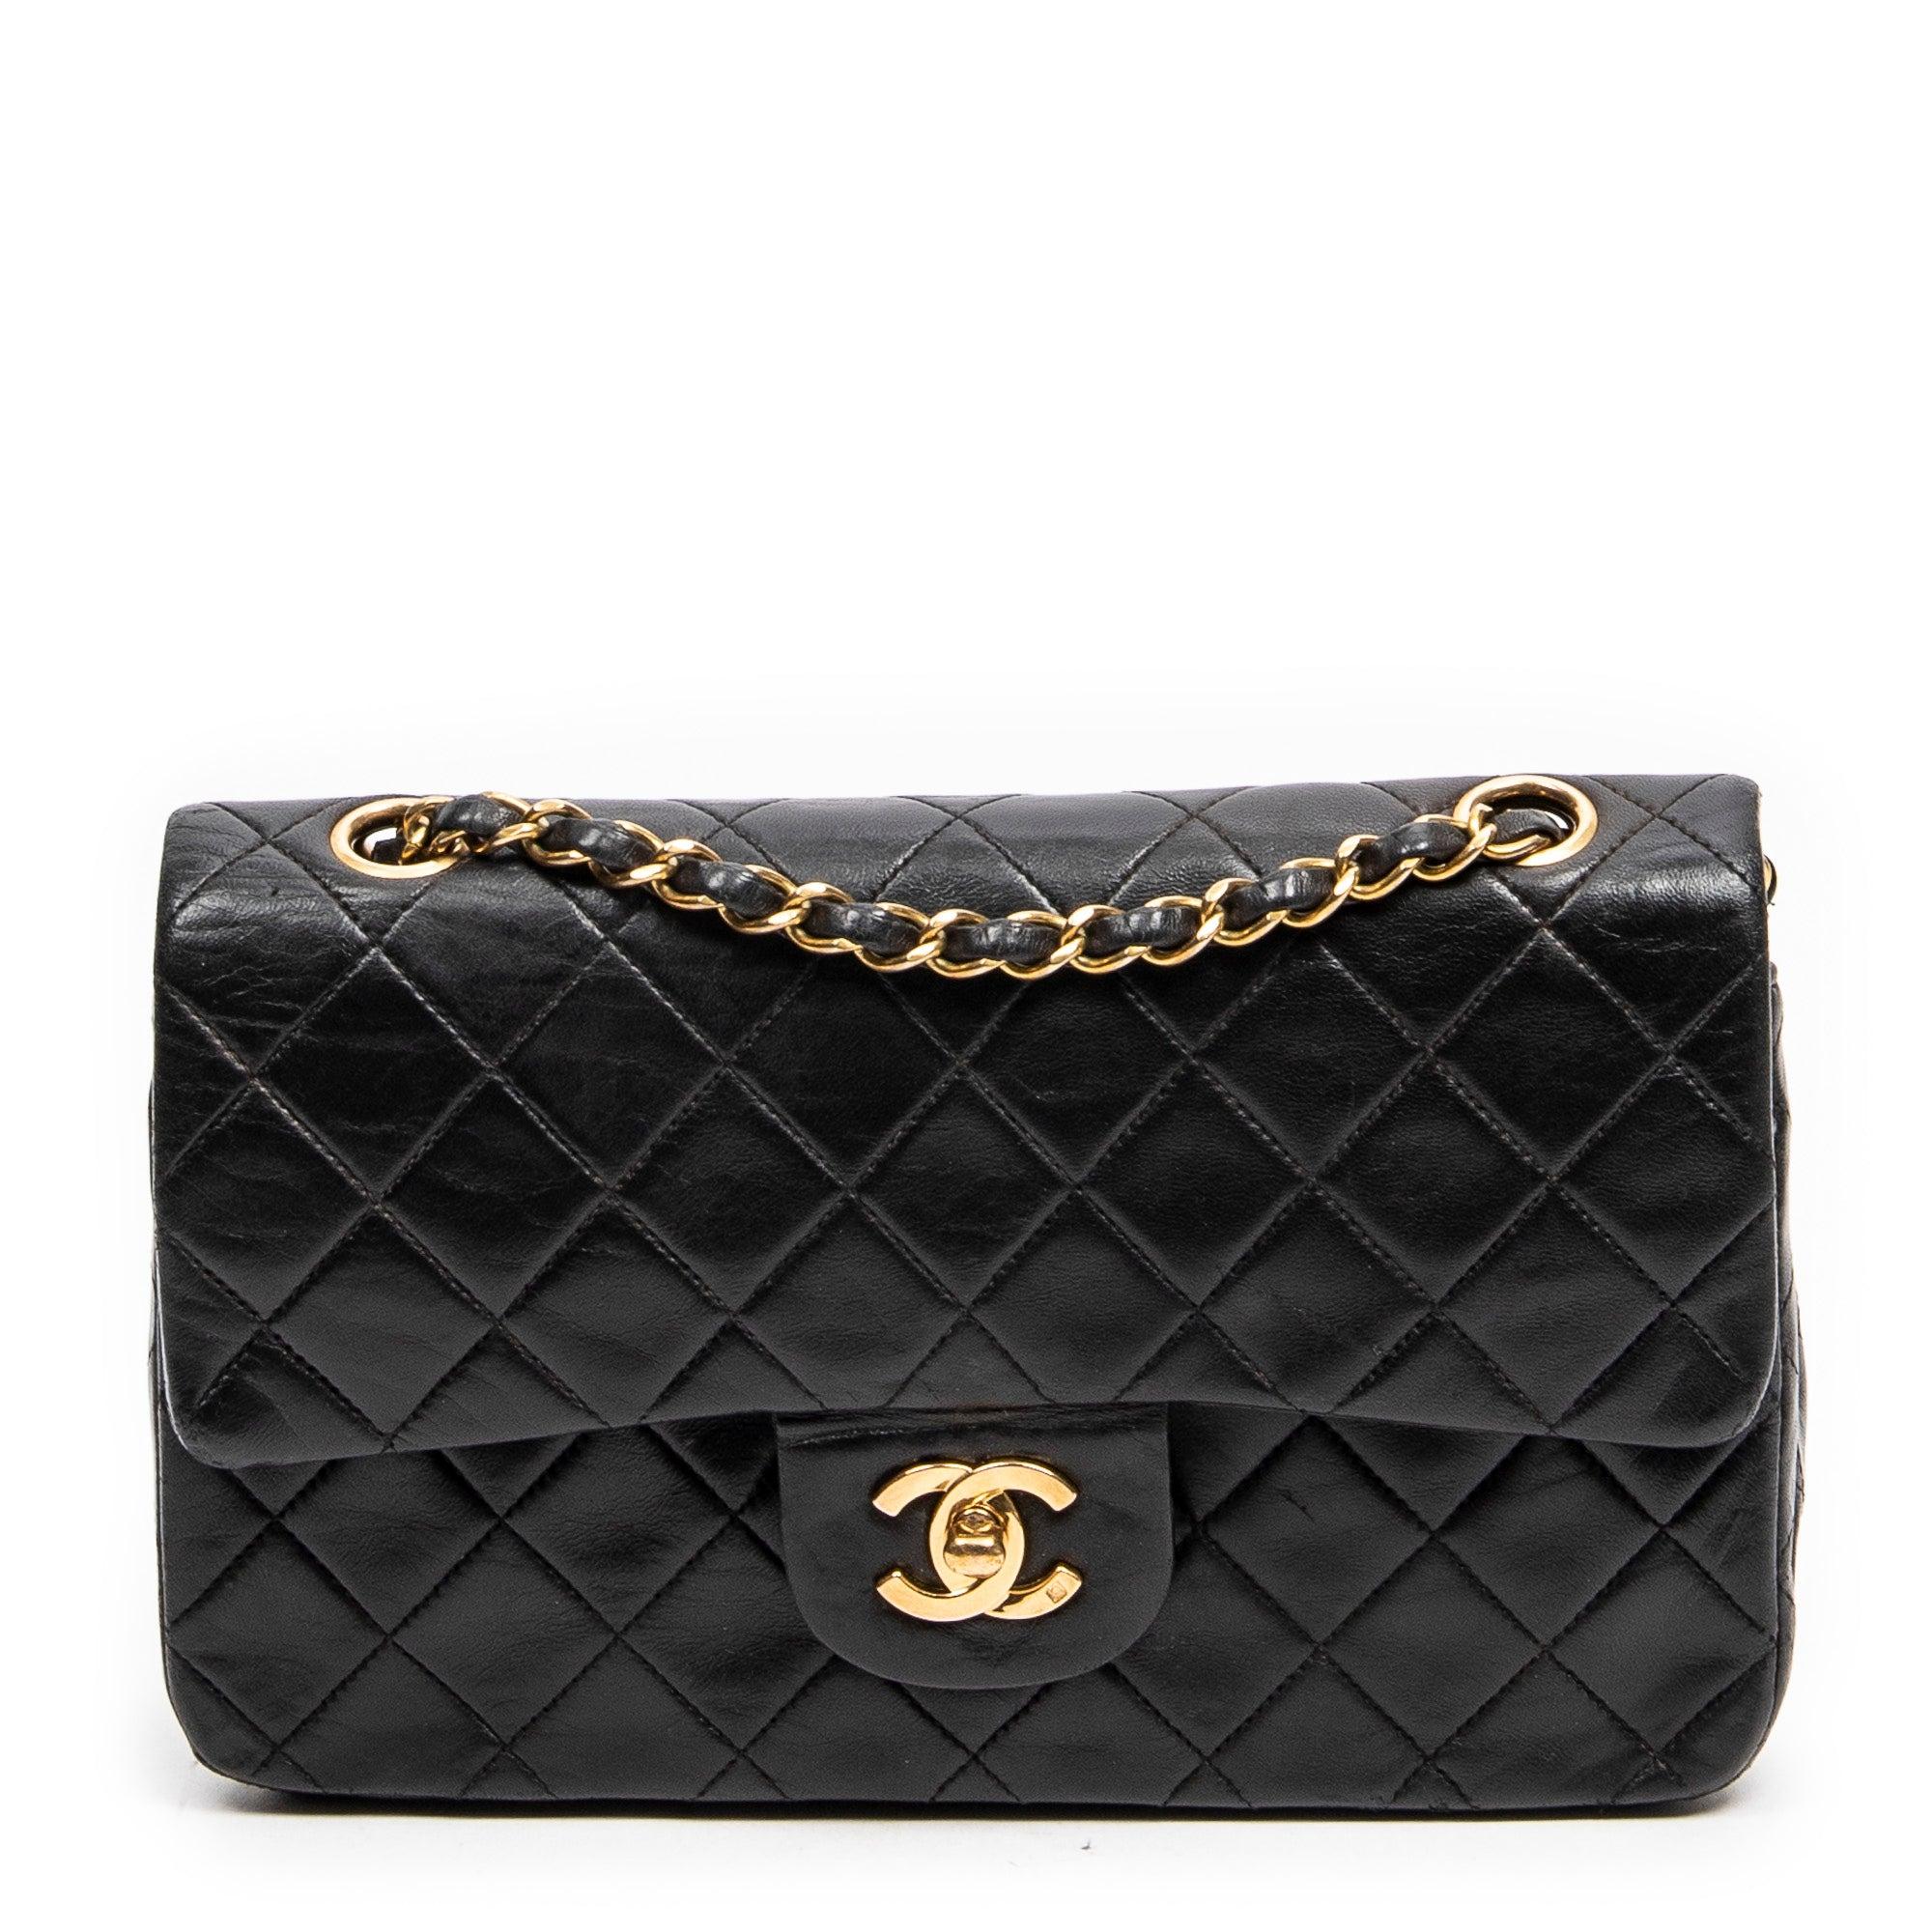 Chanel Red Quilted Patent Leather Maxi Classic Single Flap Bag, myGemma, JP